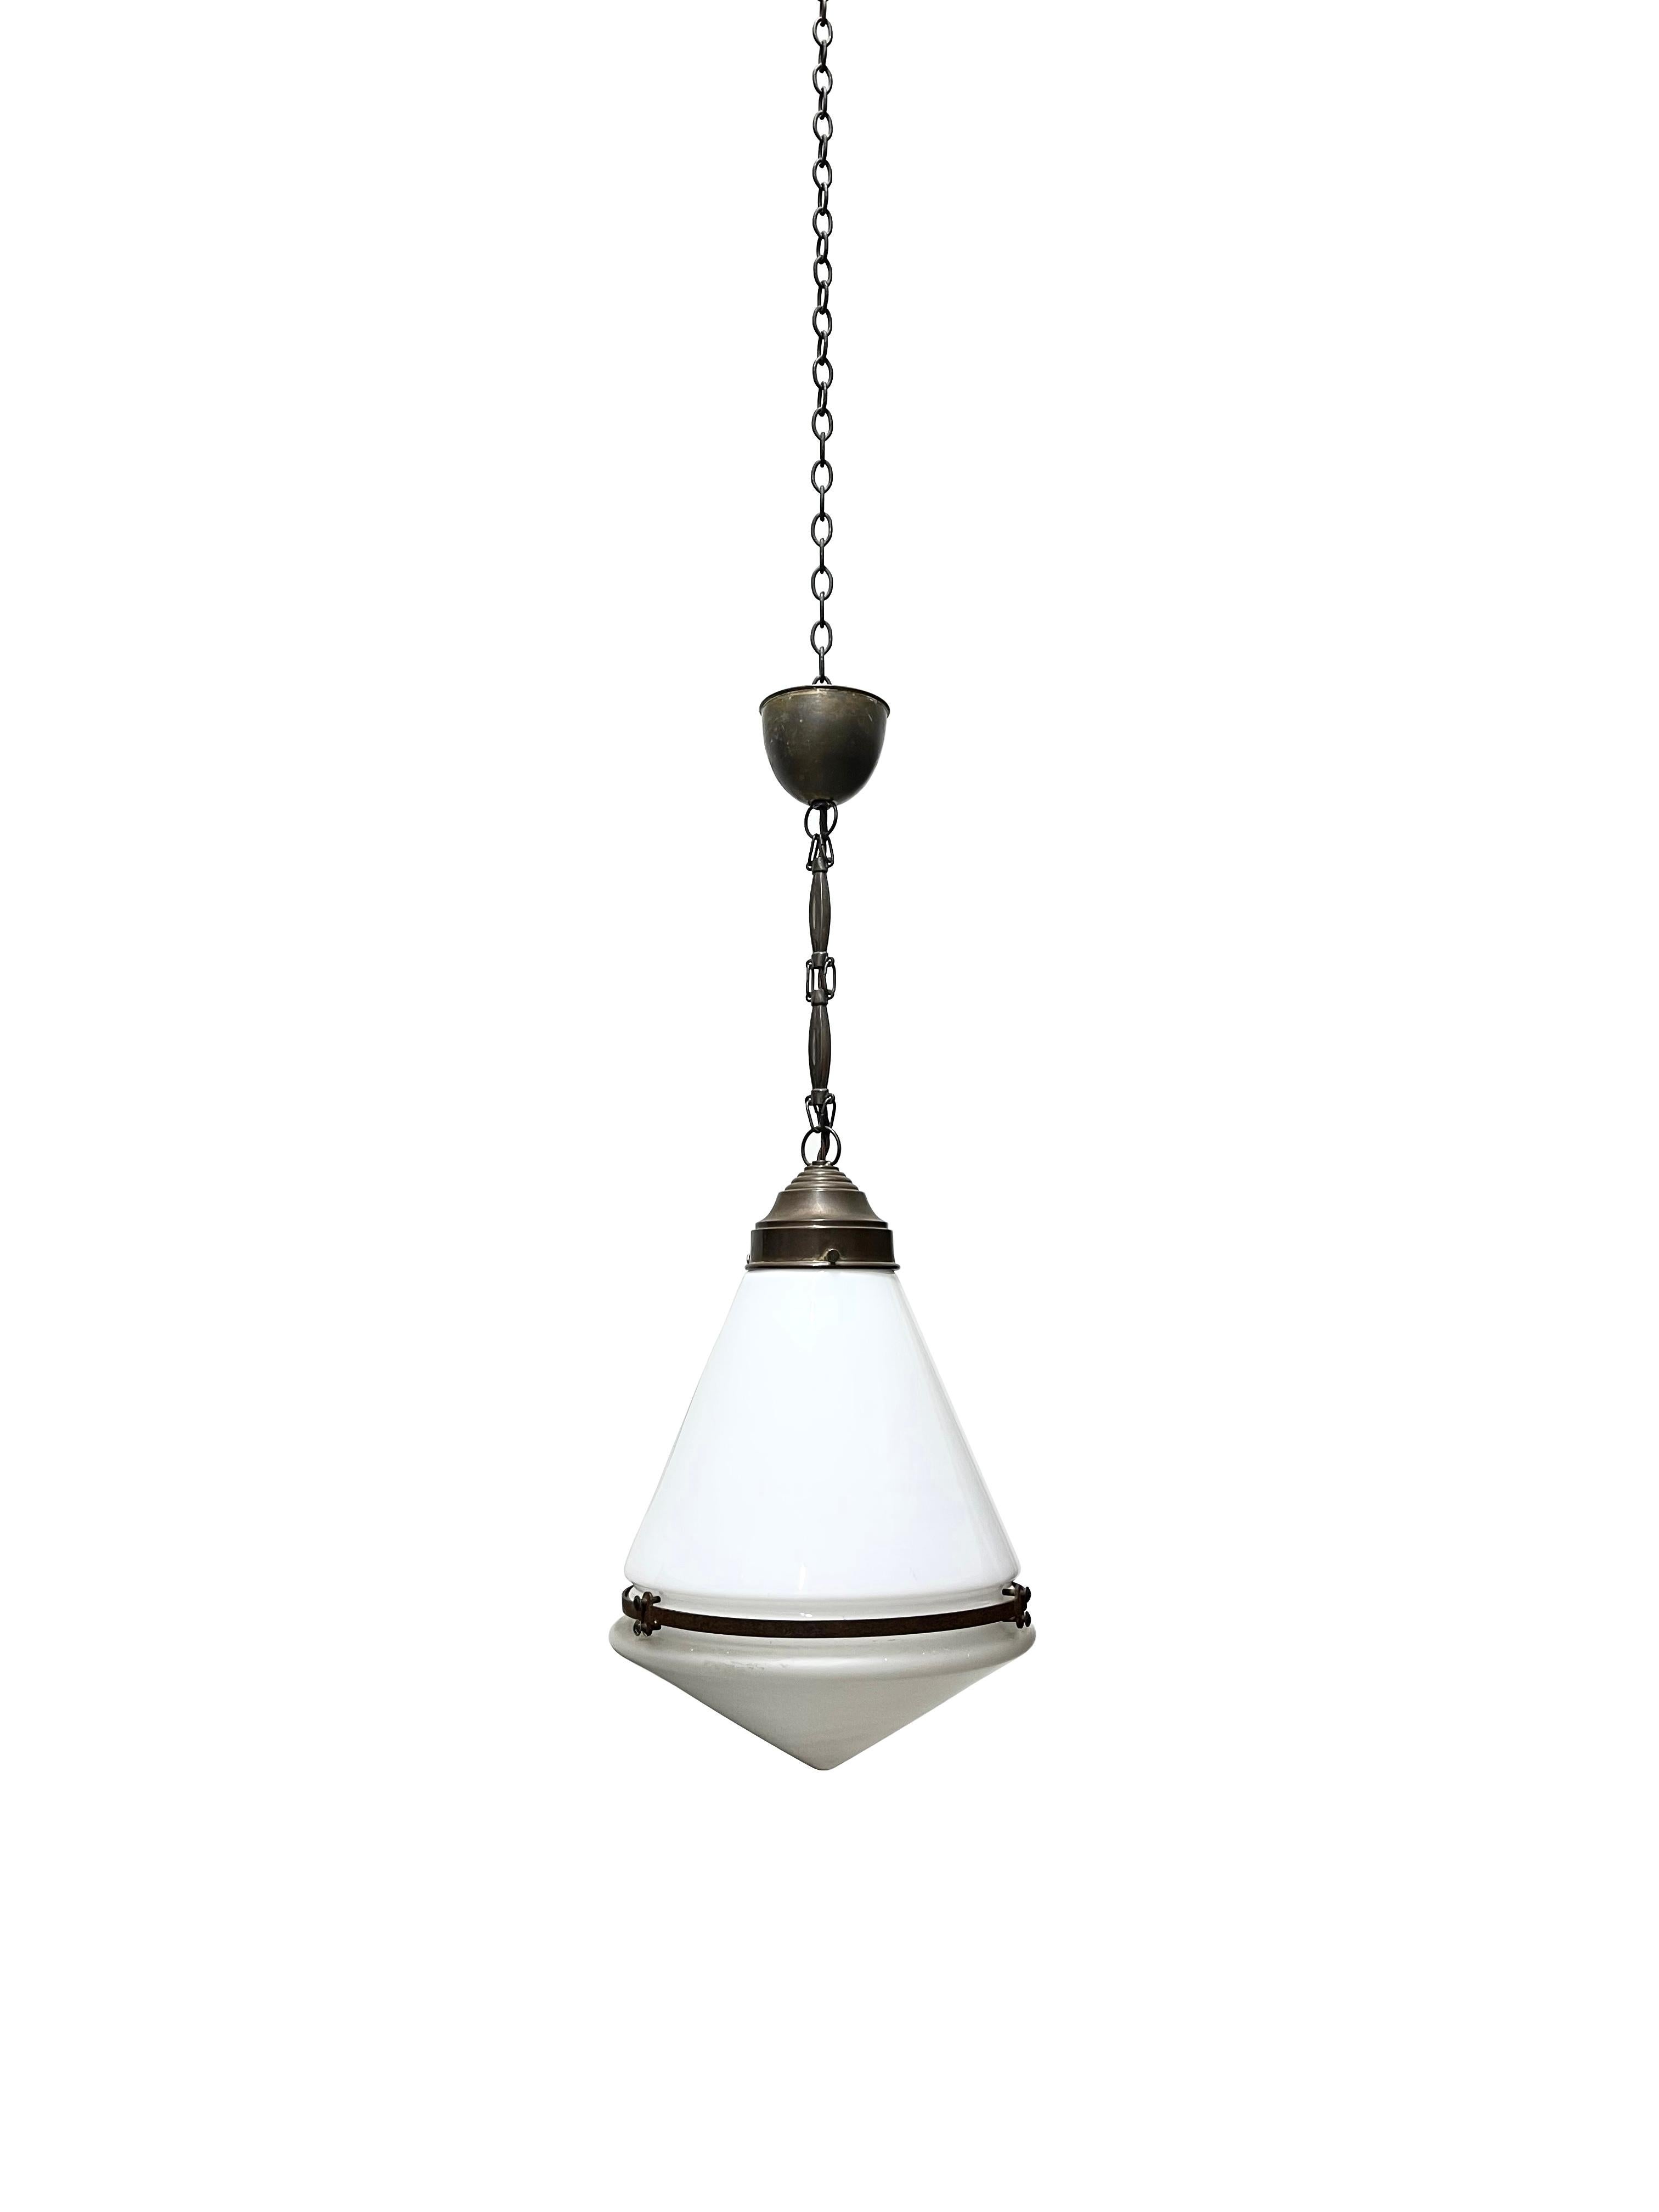 Antique Conical Opaline Milk Glass Ceiling Pendant Light by Peter Behrens For Sale 1